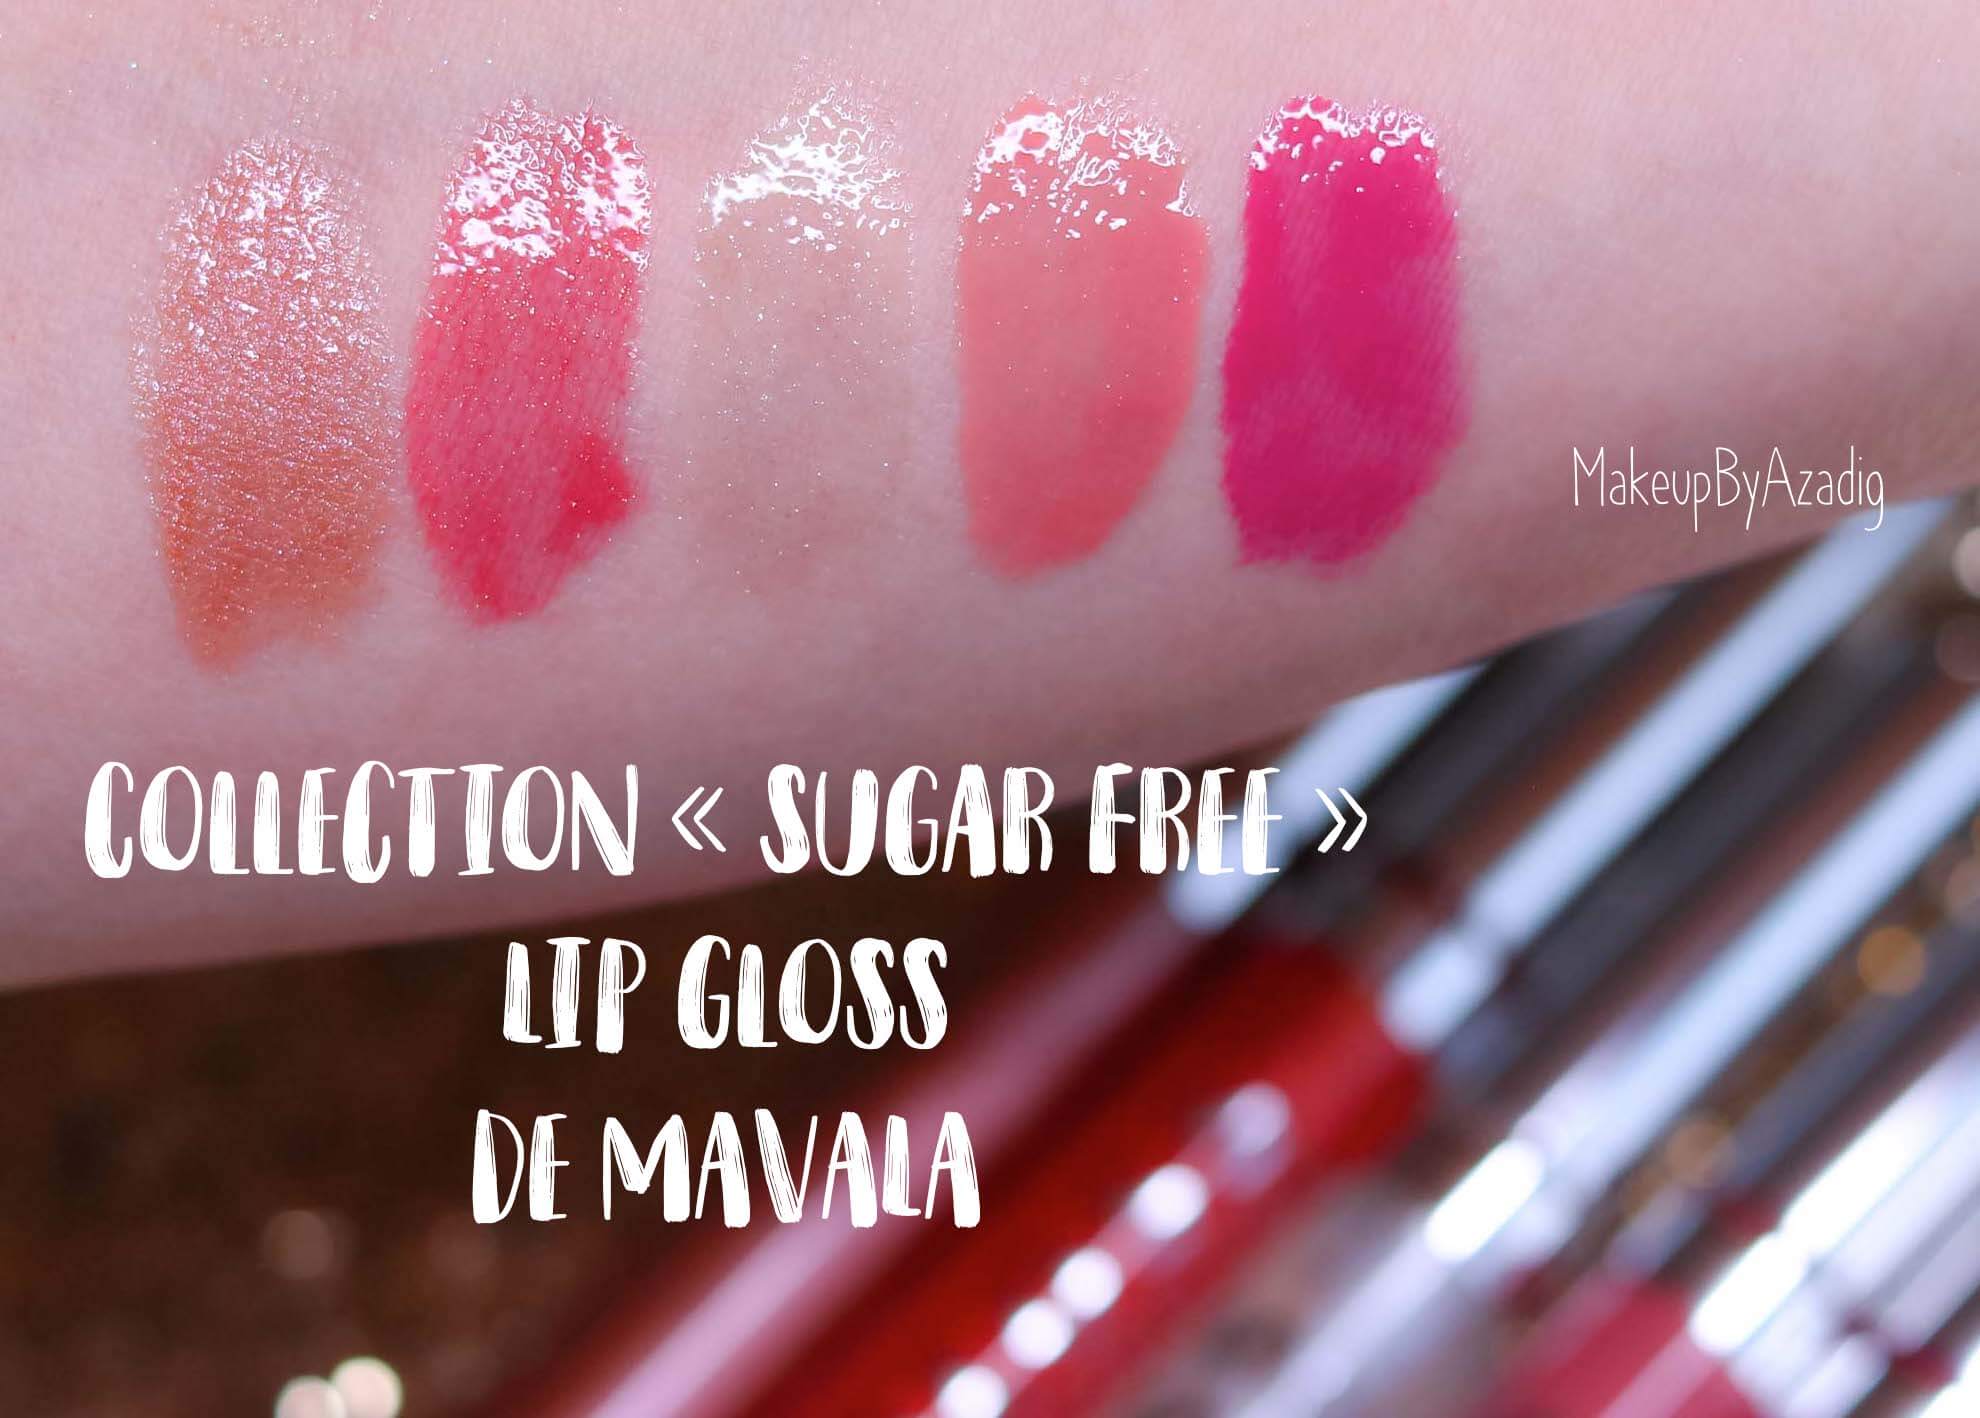 revue-lip-gloss-mavala-sugar-free-collection-meilleur-gloss-levres-lipgloss-rose-rouge-brillant-makeupbyazadig-avis-prix-swatch-swatches